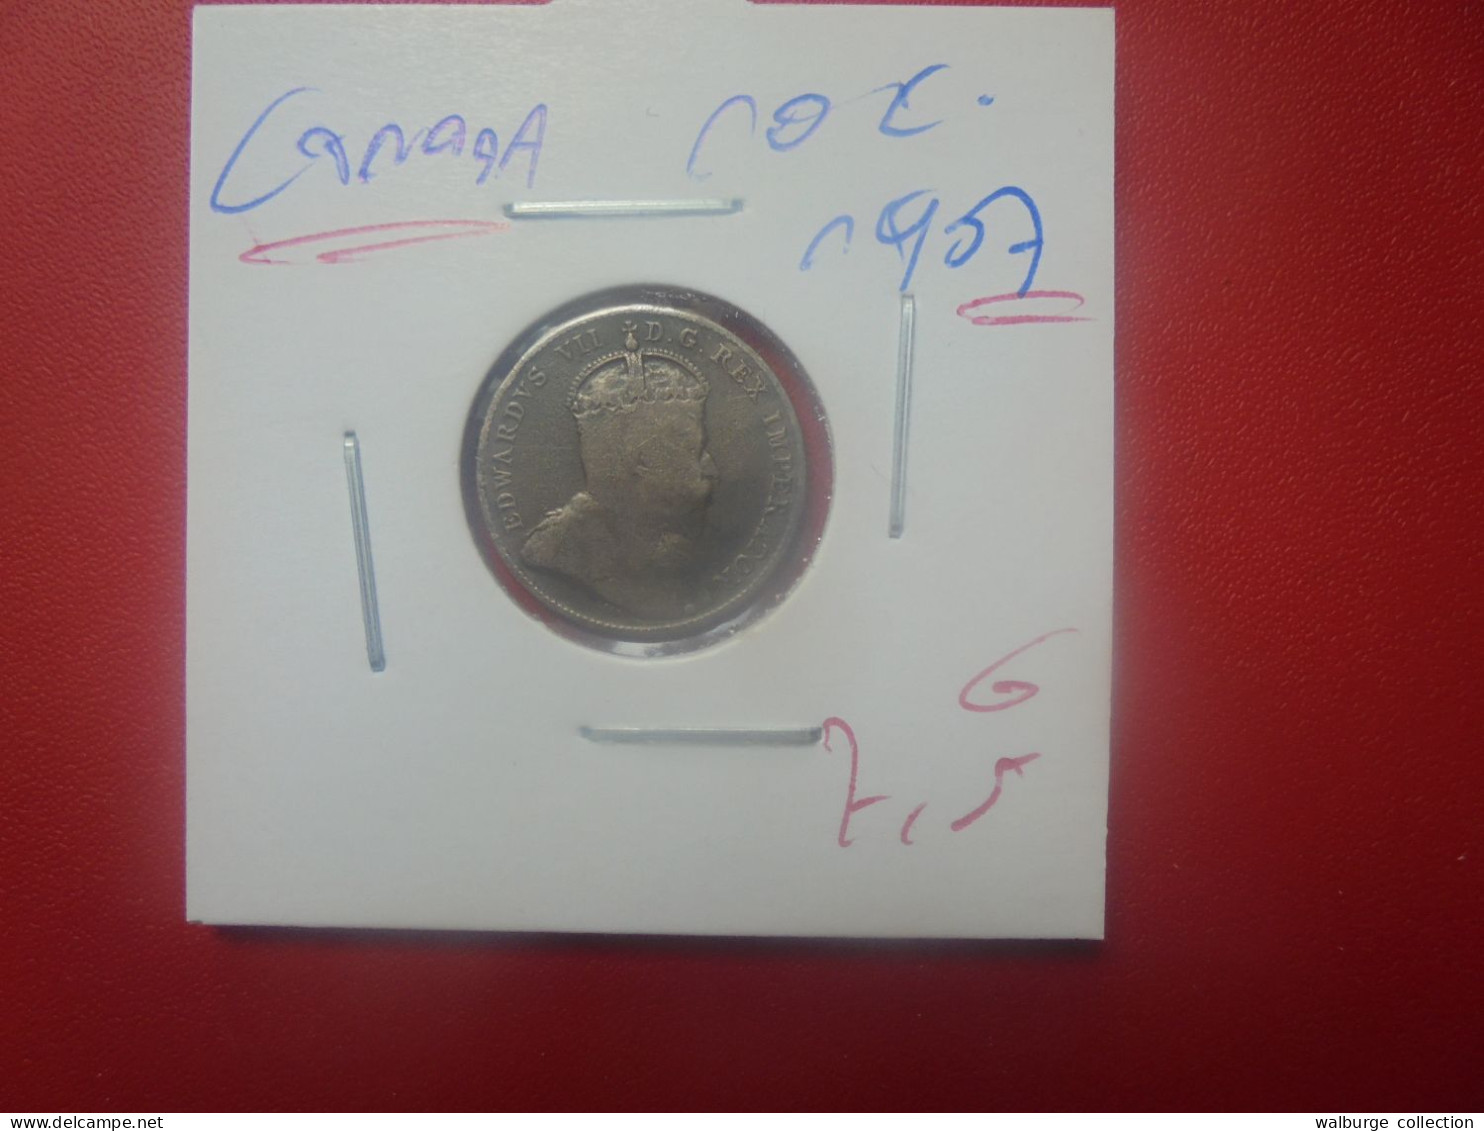 CANADA 10 CENTS 1907 ARGENT (A.1) - Canada